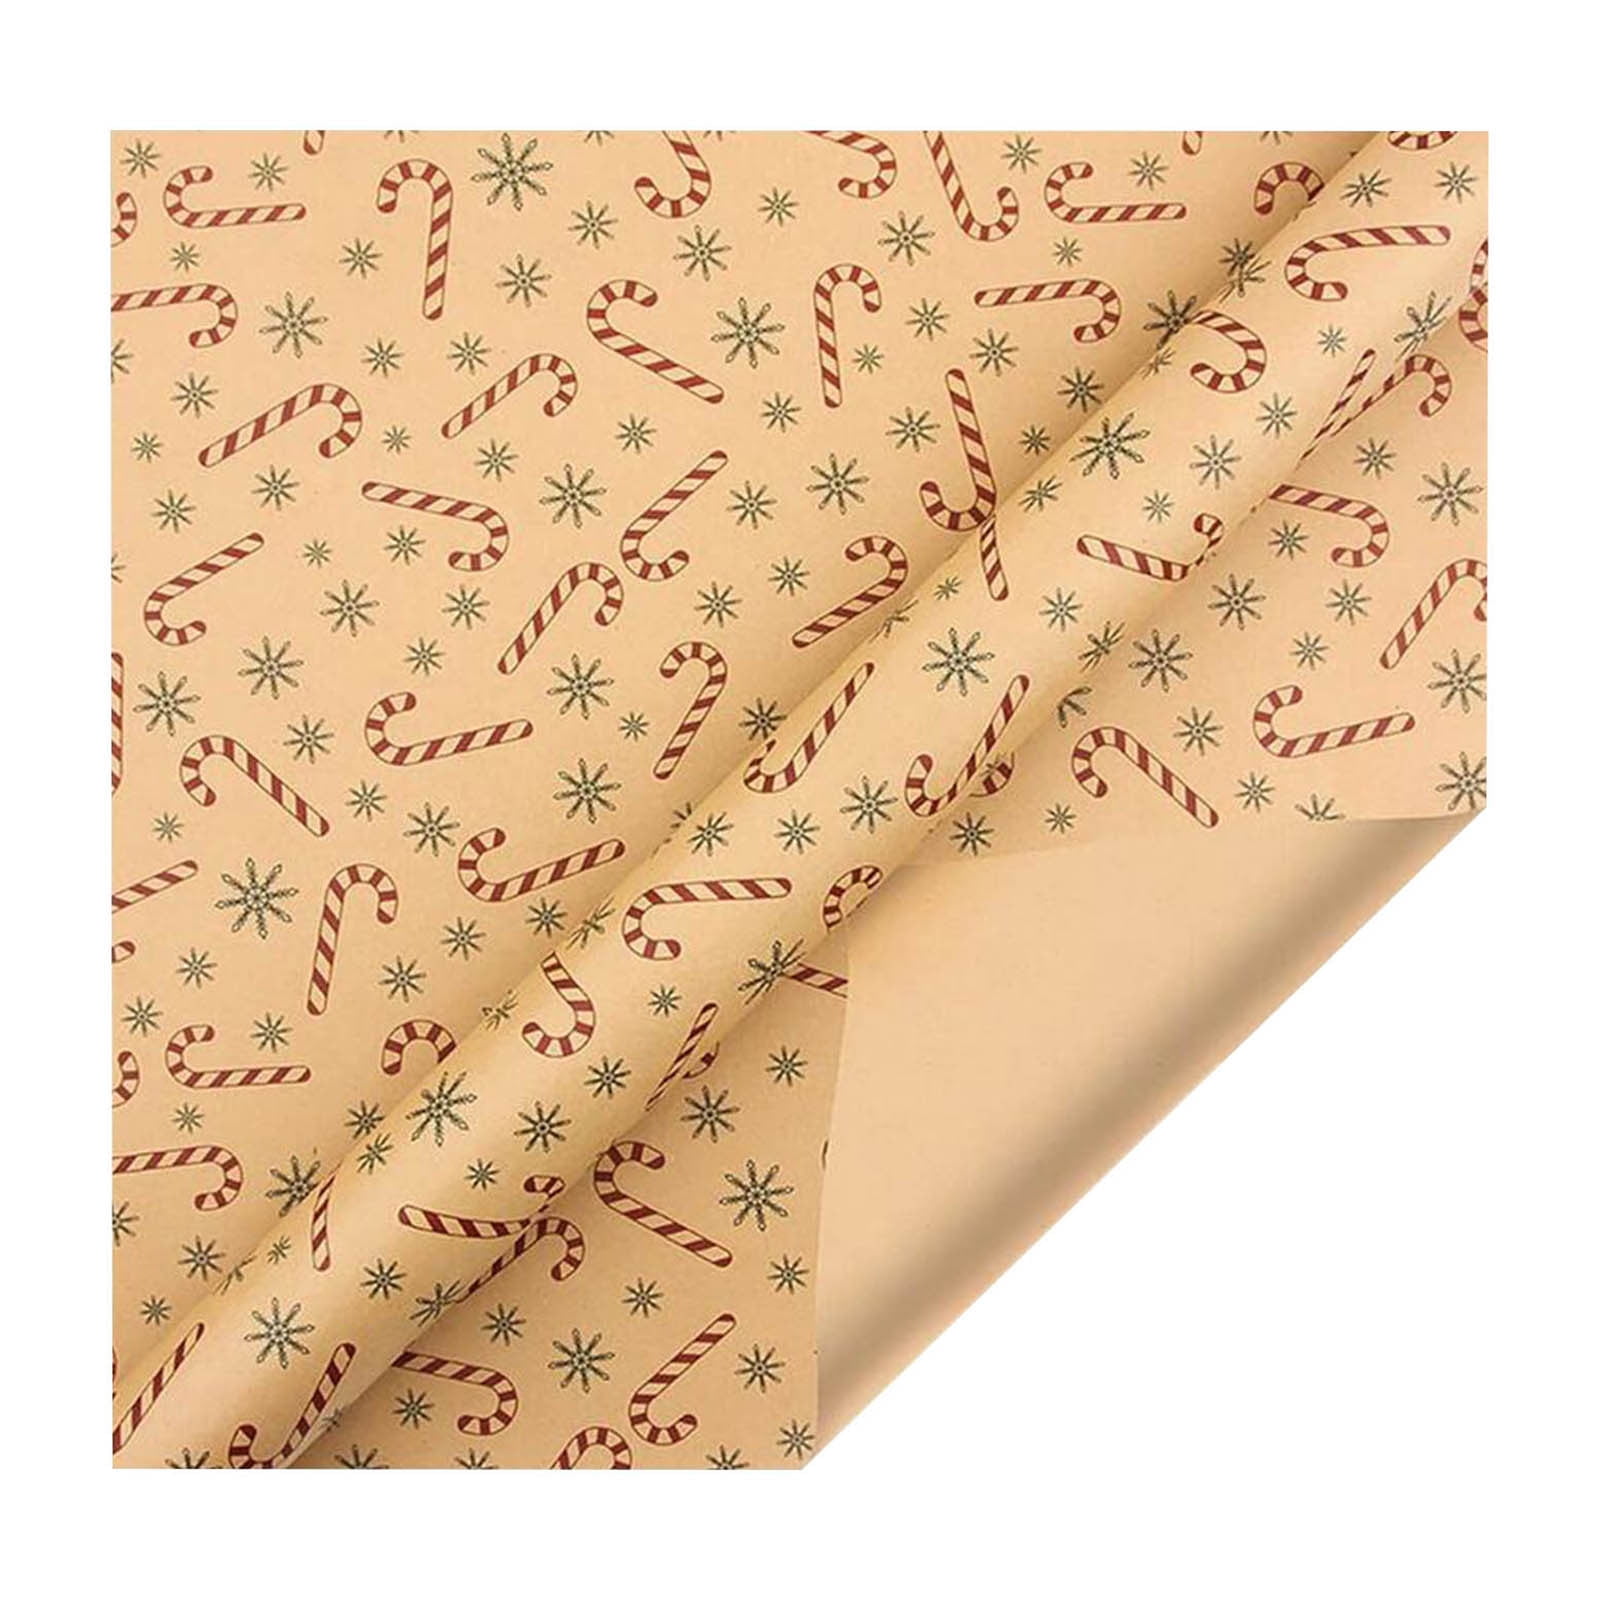 BOILED SWEETS gift-wrap eco-friendly wrap 2 sheets of 70x50cm quality 